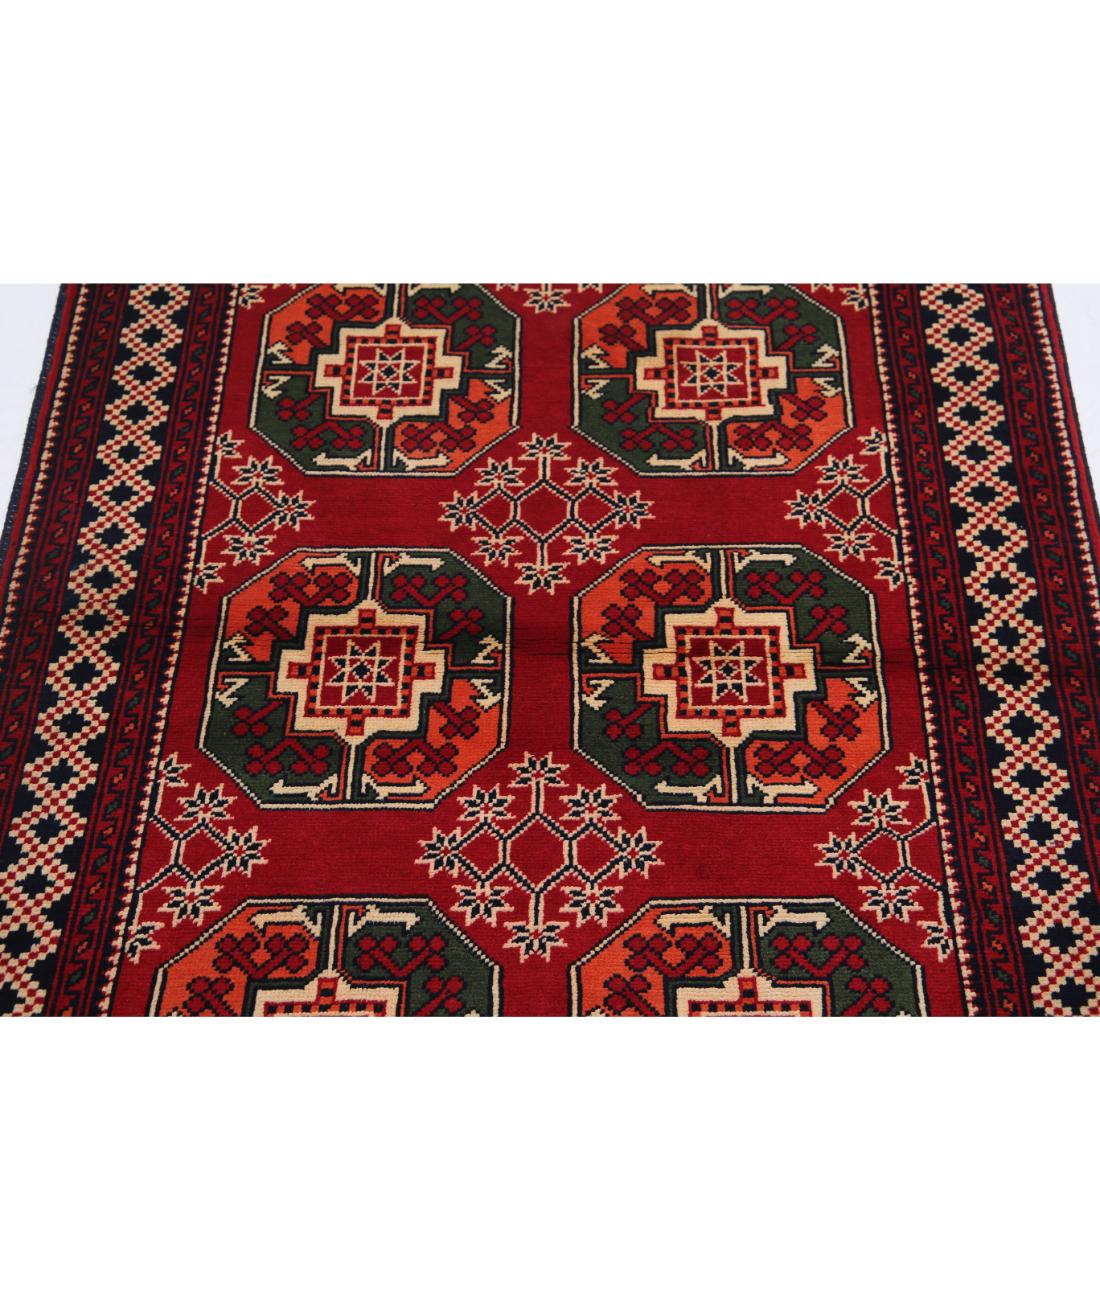 Afghan 3' 4" X 4' 8" Hand-Knotted Wool Rug 3' 4" X 4' 8" (102 X 142) / Red / Black